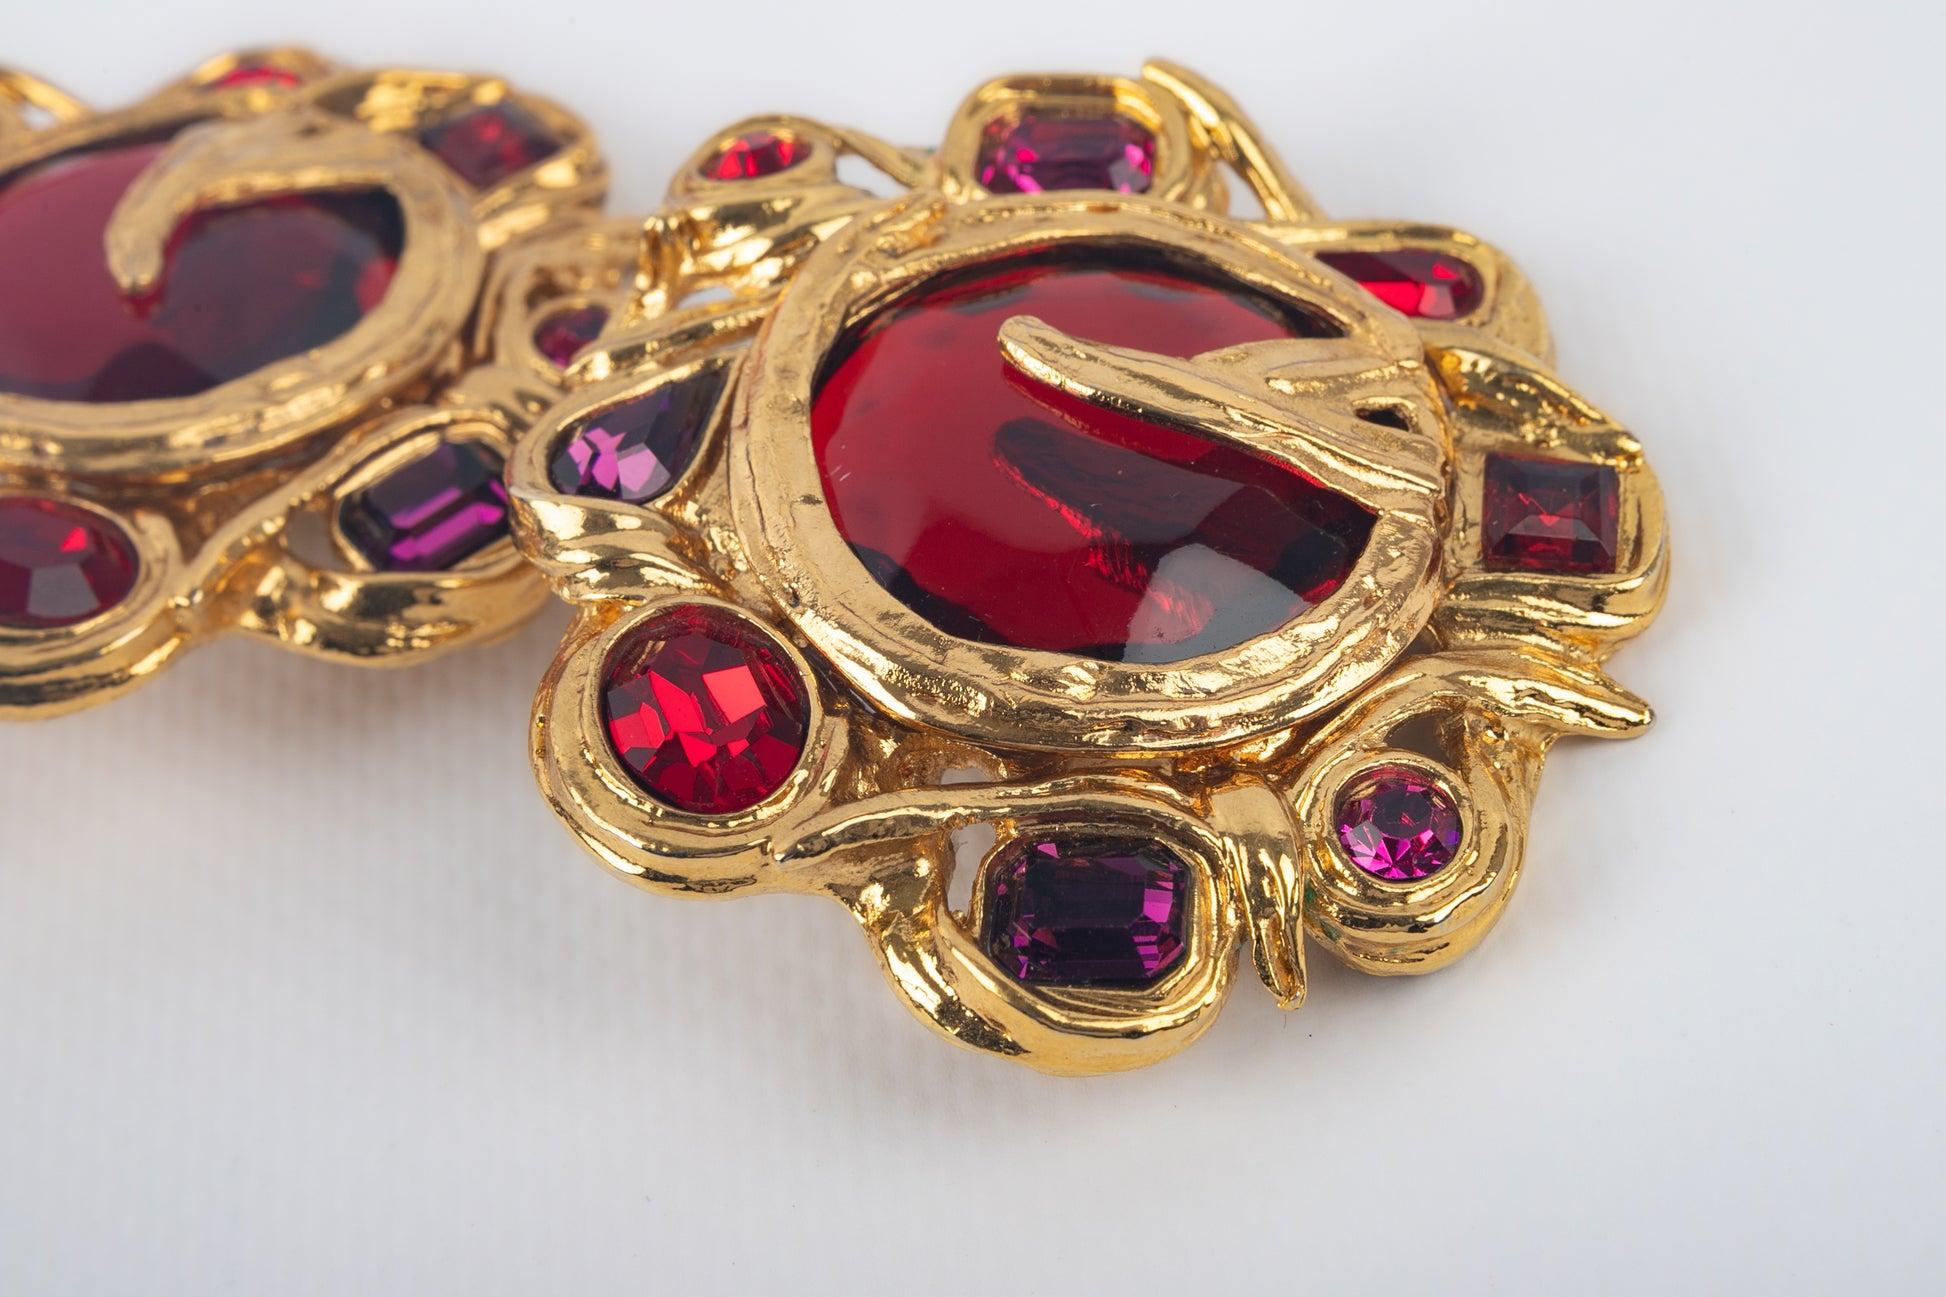 Yves Saint Laurent - (Made in France) Golden metal clip-on earrings with red tone rhinestones. Jewelry from the 1985s.

Additional information:
Condition: Very good condition
Dimensions: Diameter: 5 cm
Period: 20th Century

Seller Reference: BO293
